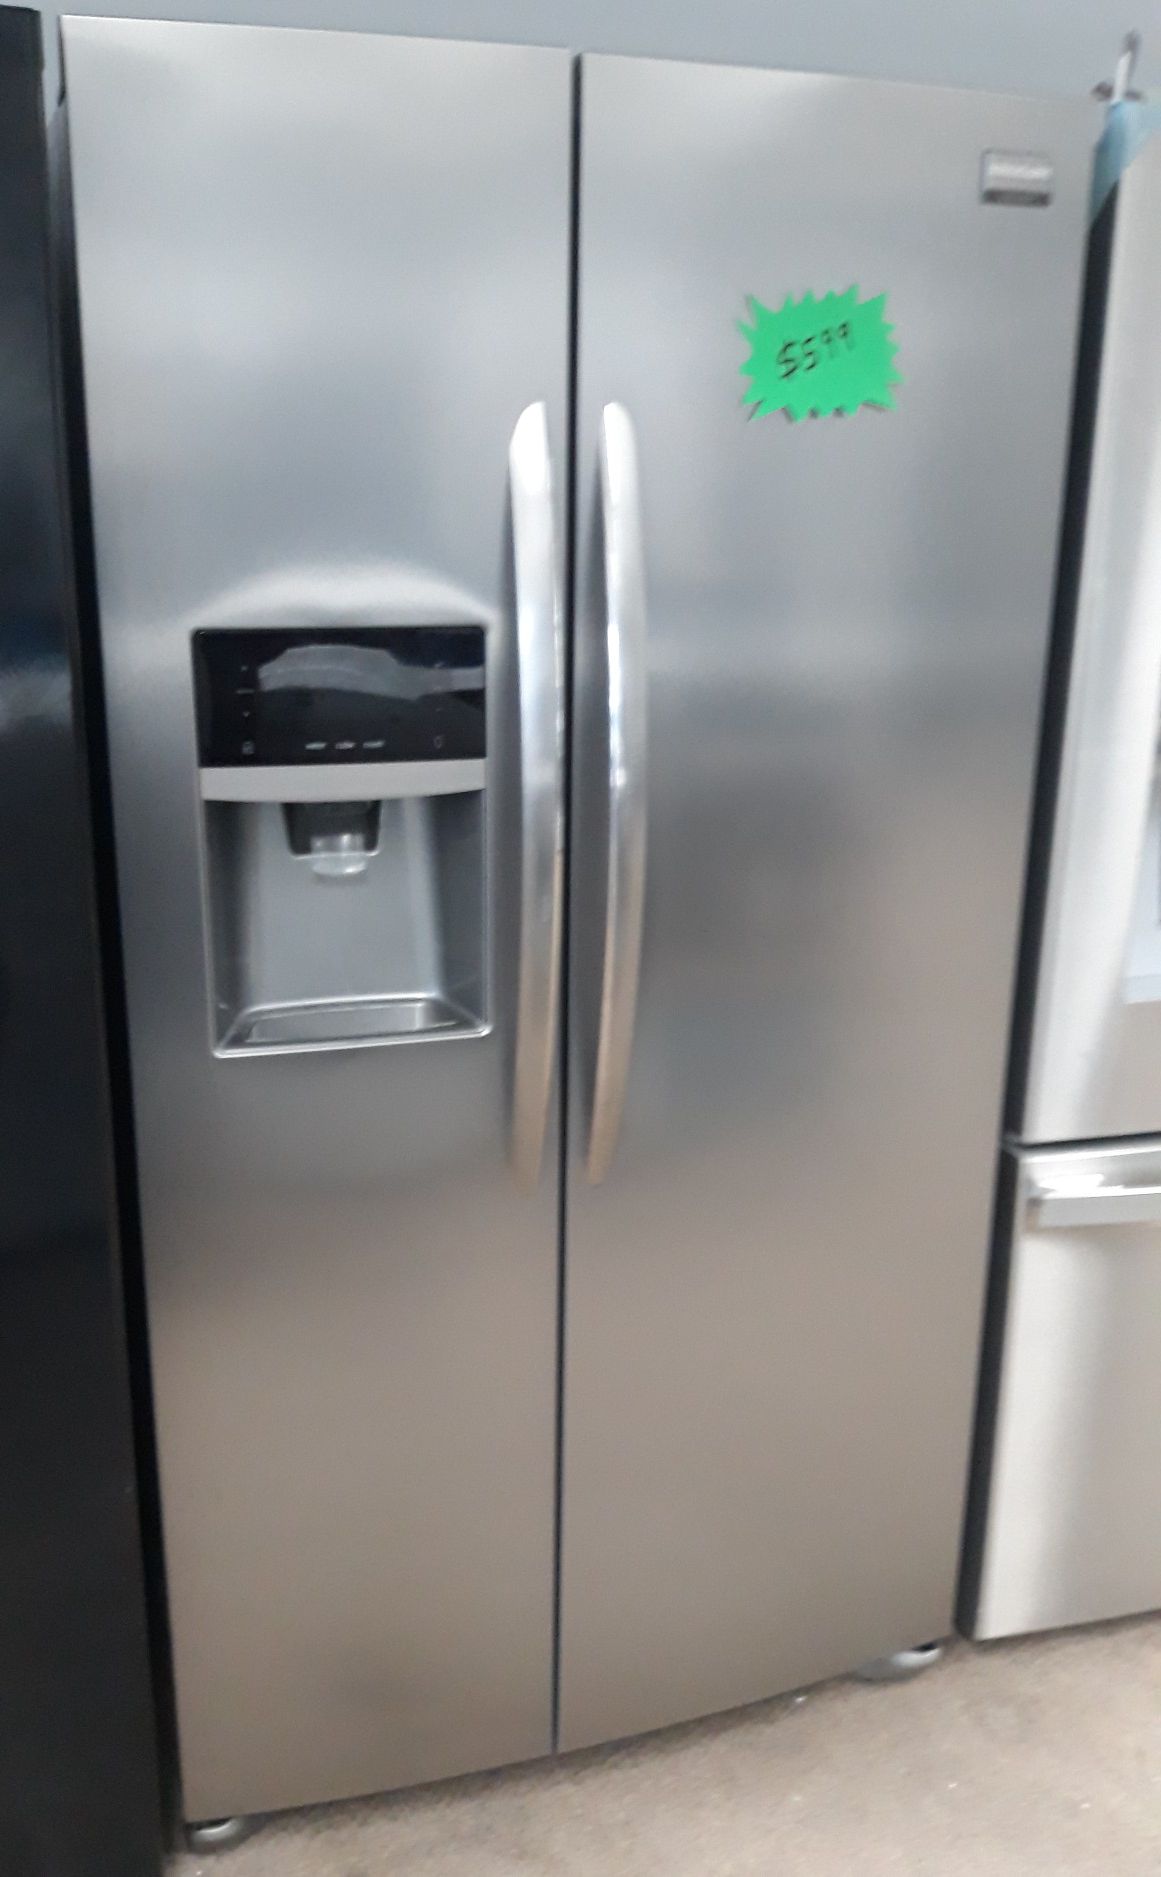 Stainless steel side by side refrigerator excellent condition like new